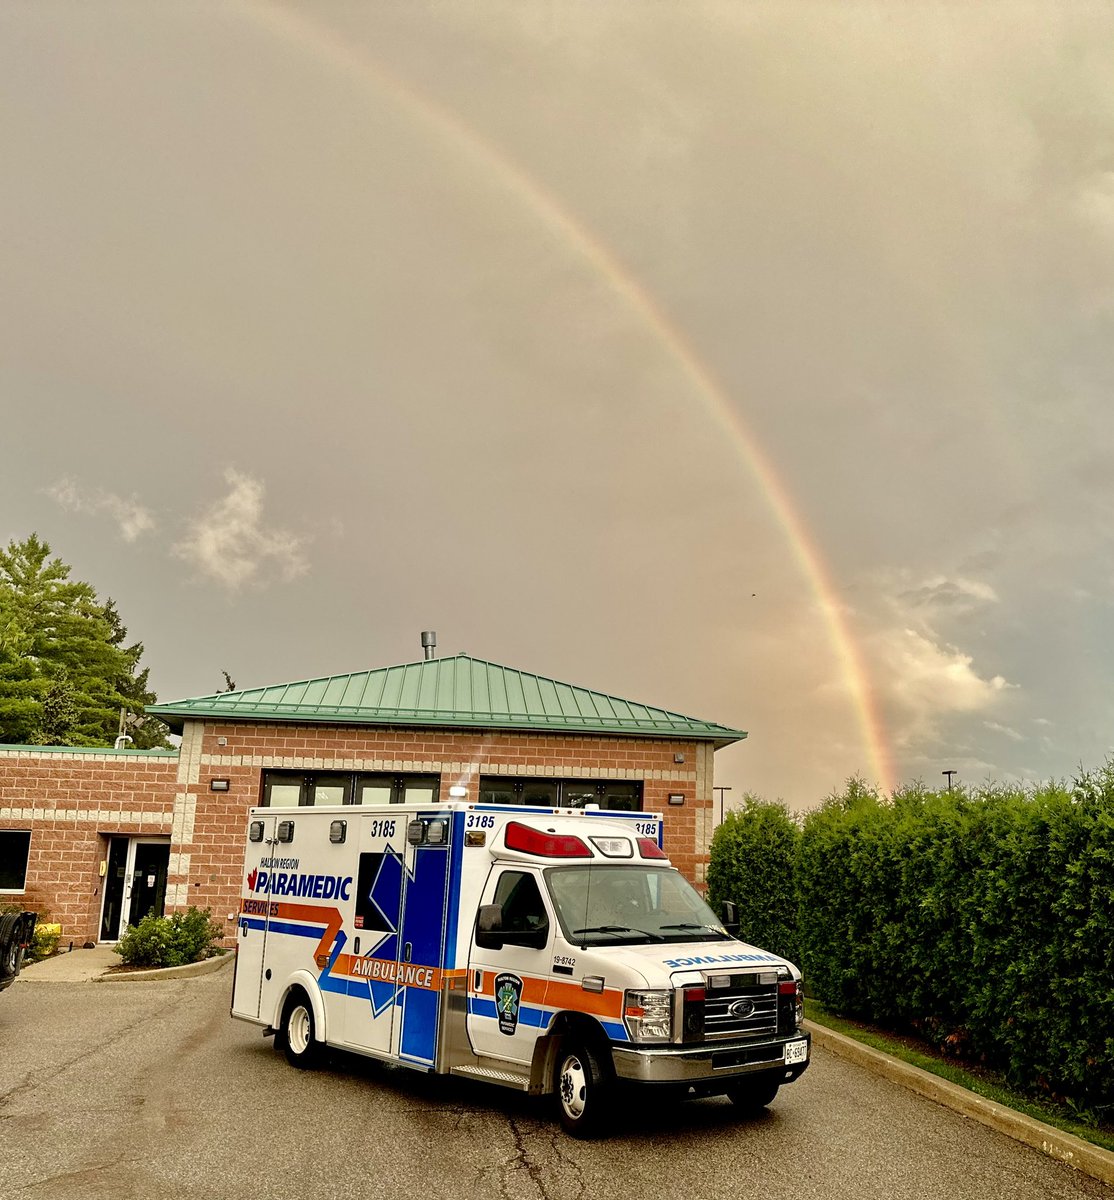 Love the rainbow 🌈 after the storm 🚑.